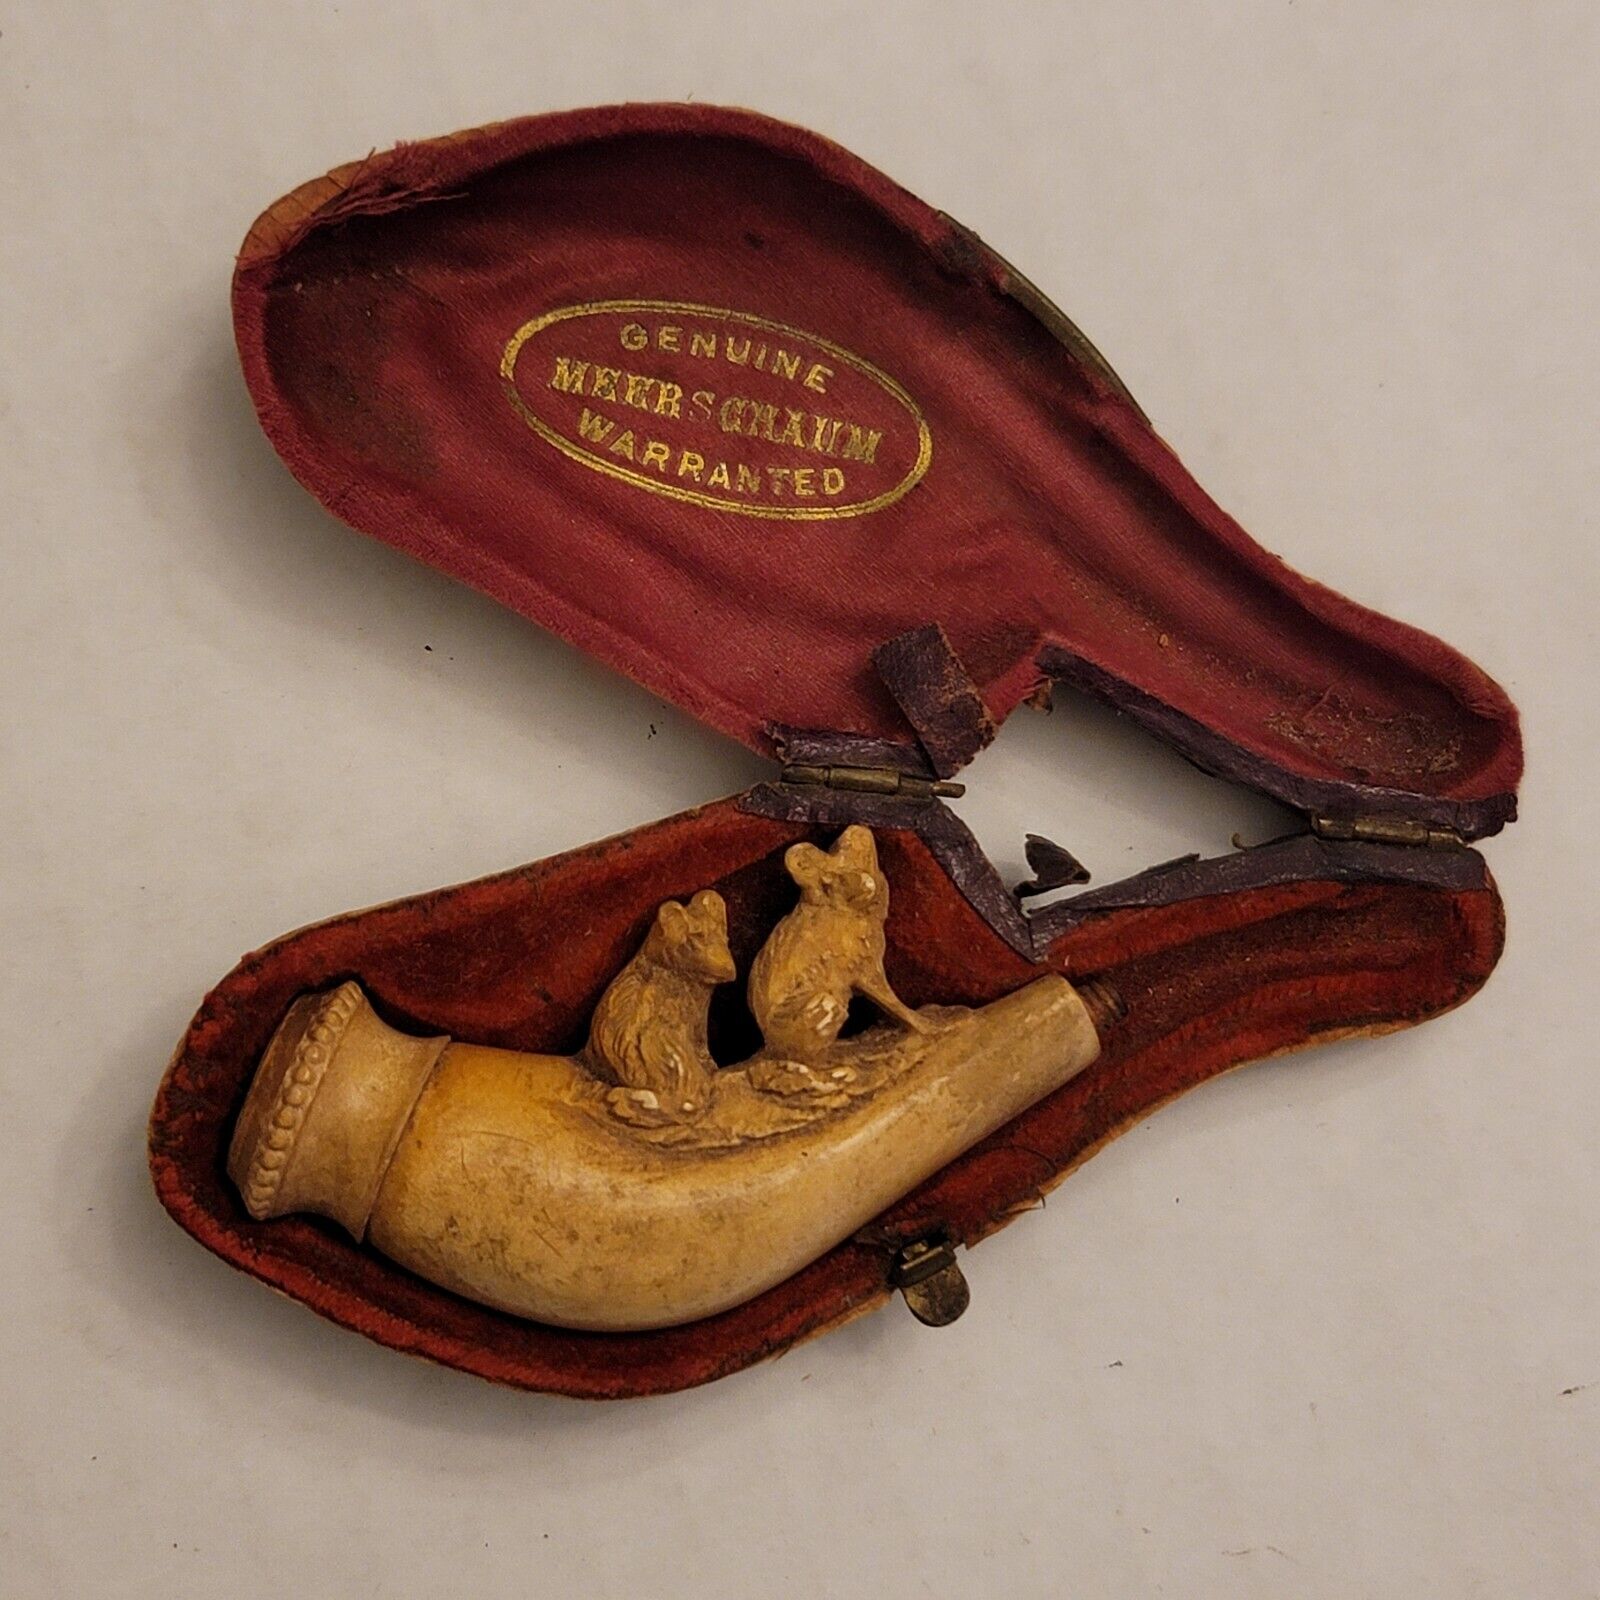 Antique Meerschaum Tobacco Smoking Pipe 2 Wolves In Fitted Case 2.5” Handcarved